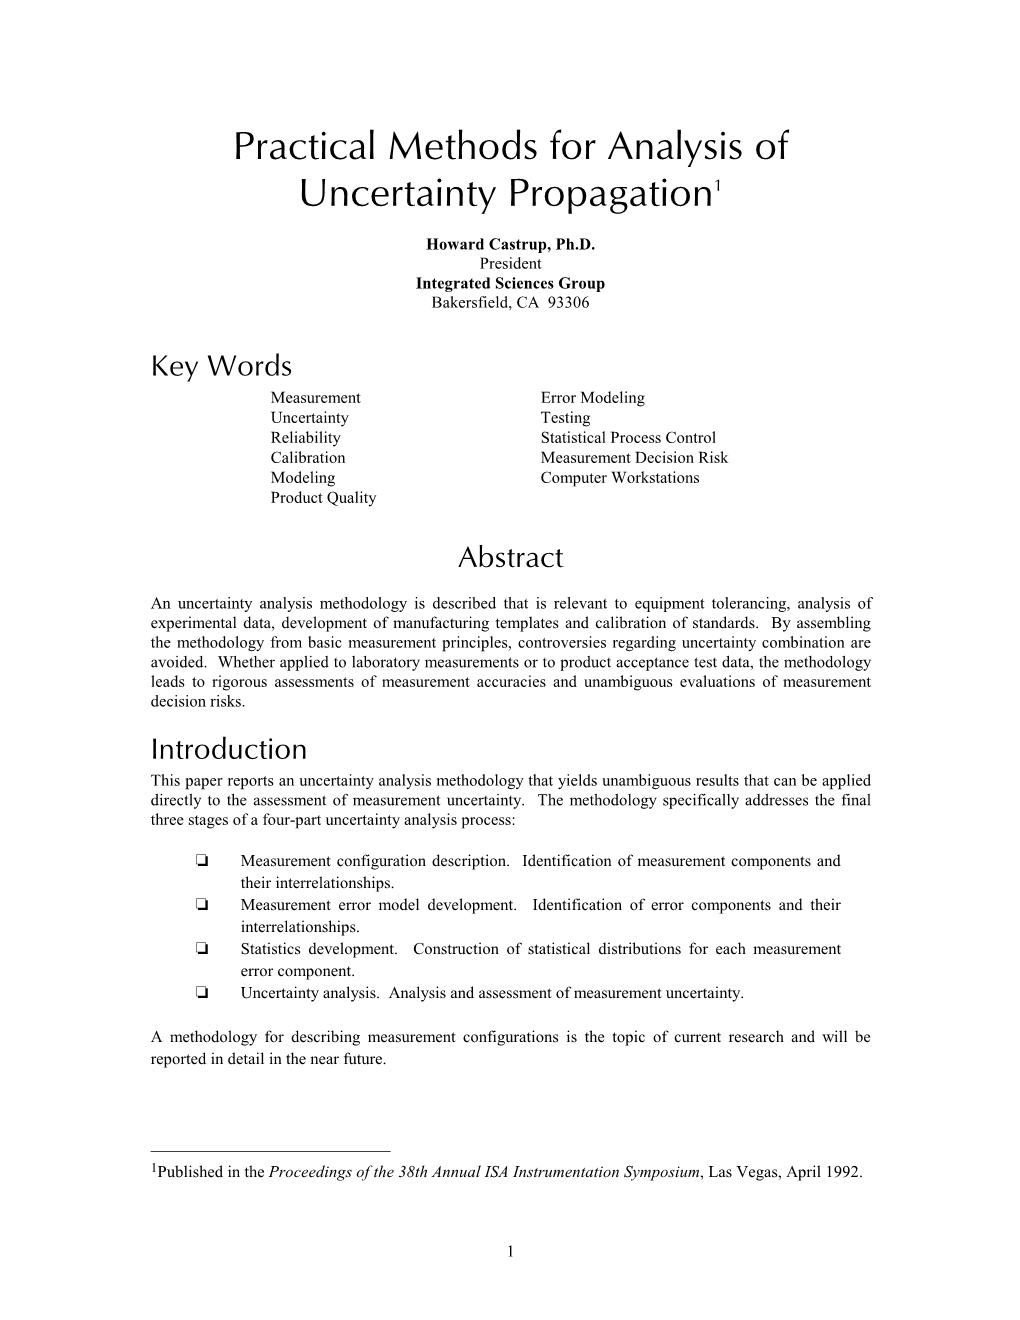 Practical Methods for Analysis of Uncertainty Propagation1